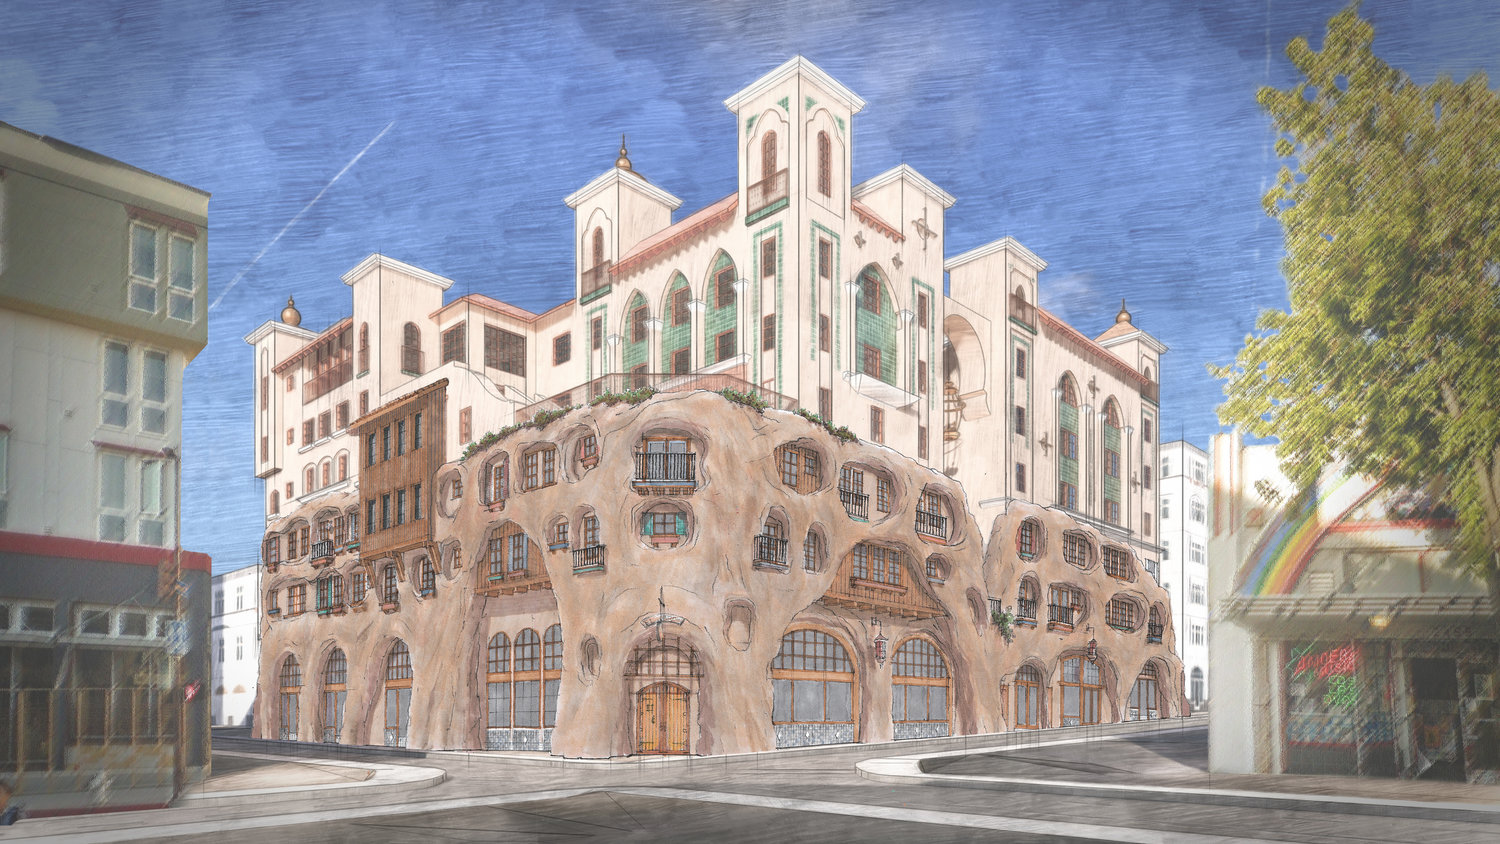 Watercolor drawing of the new UC Berkeley dorm building that resembles a villa rising from rocks